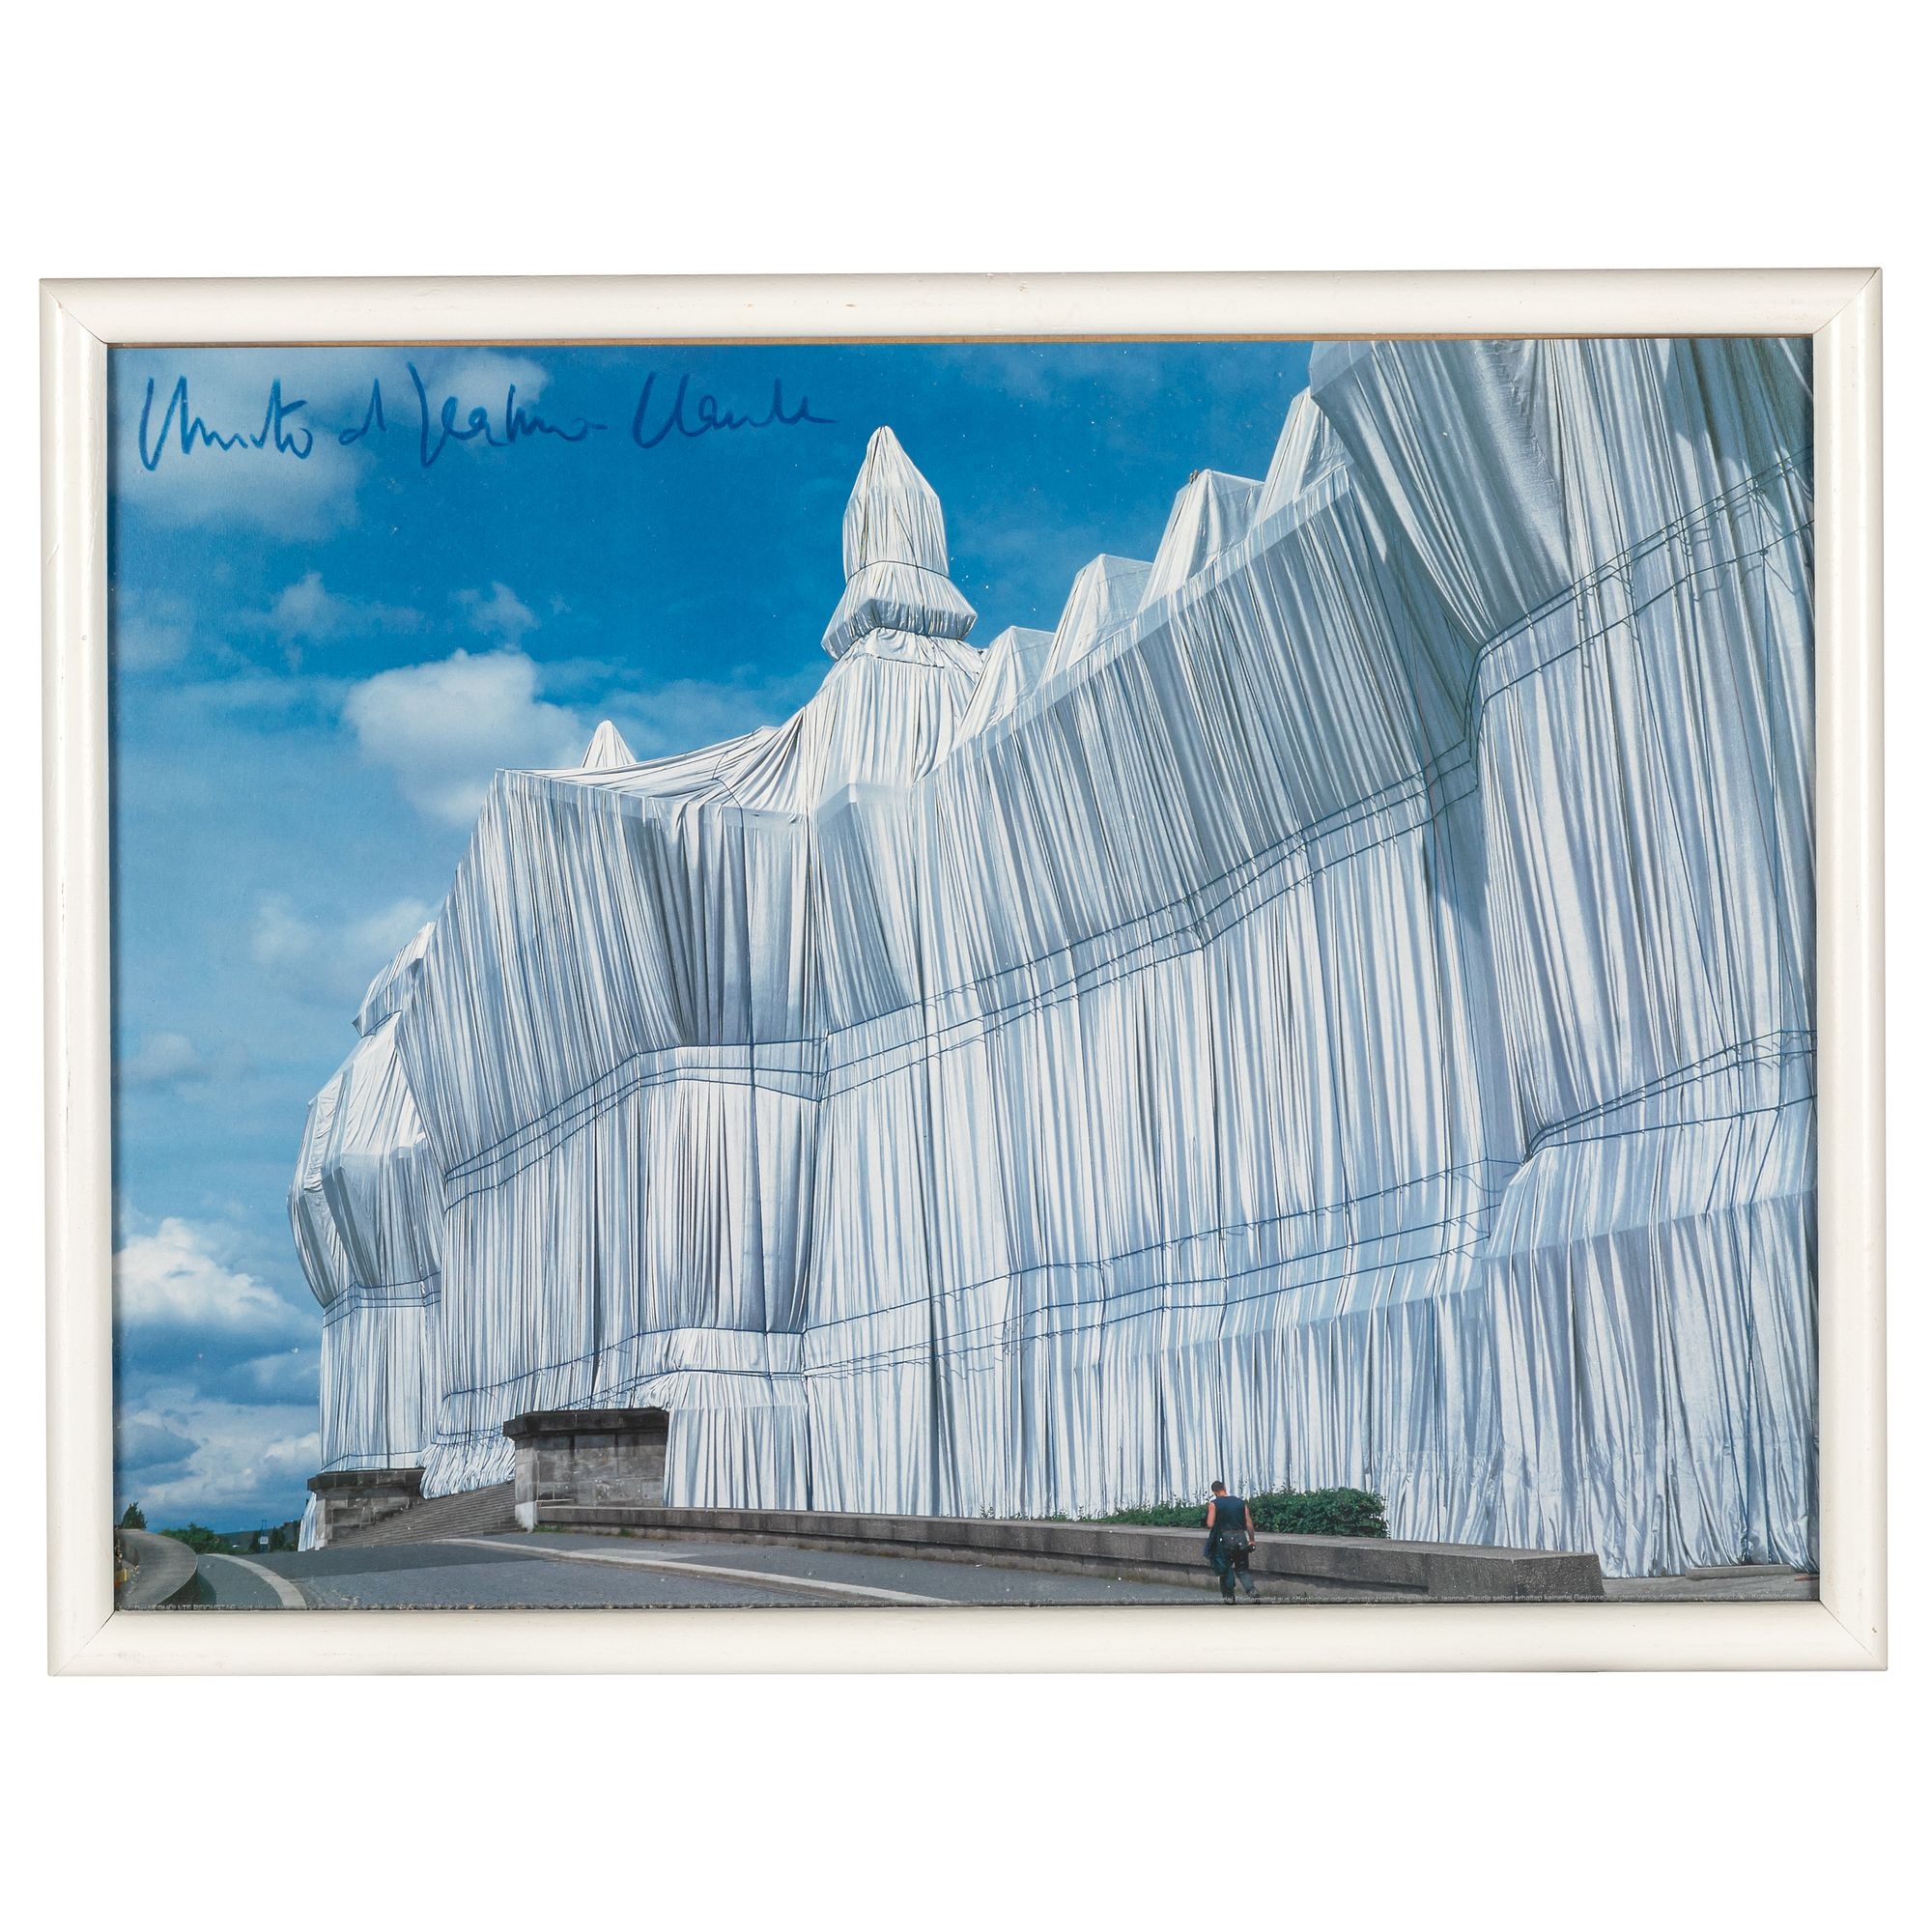 Christo and Jeanne Claude, Wrapped Reichstag - Wolfgang Volz